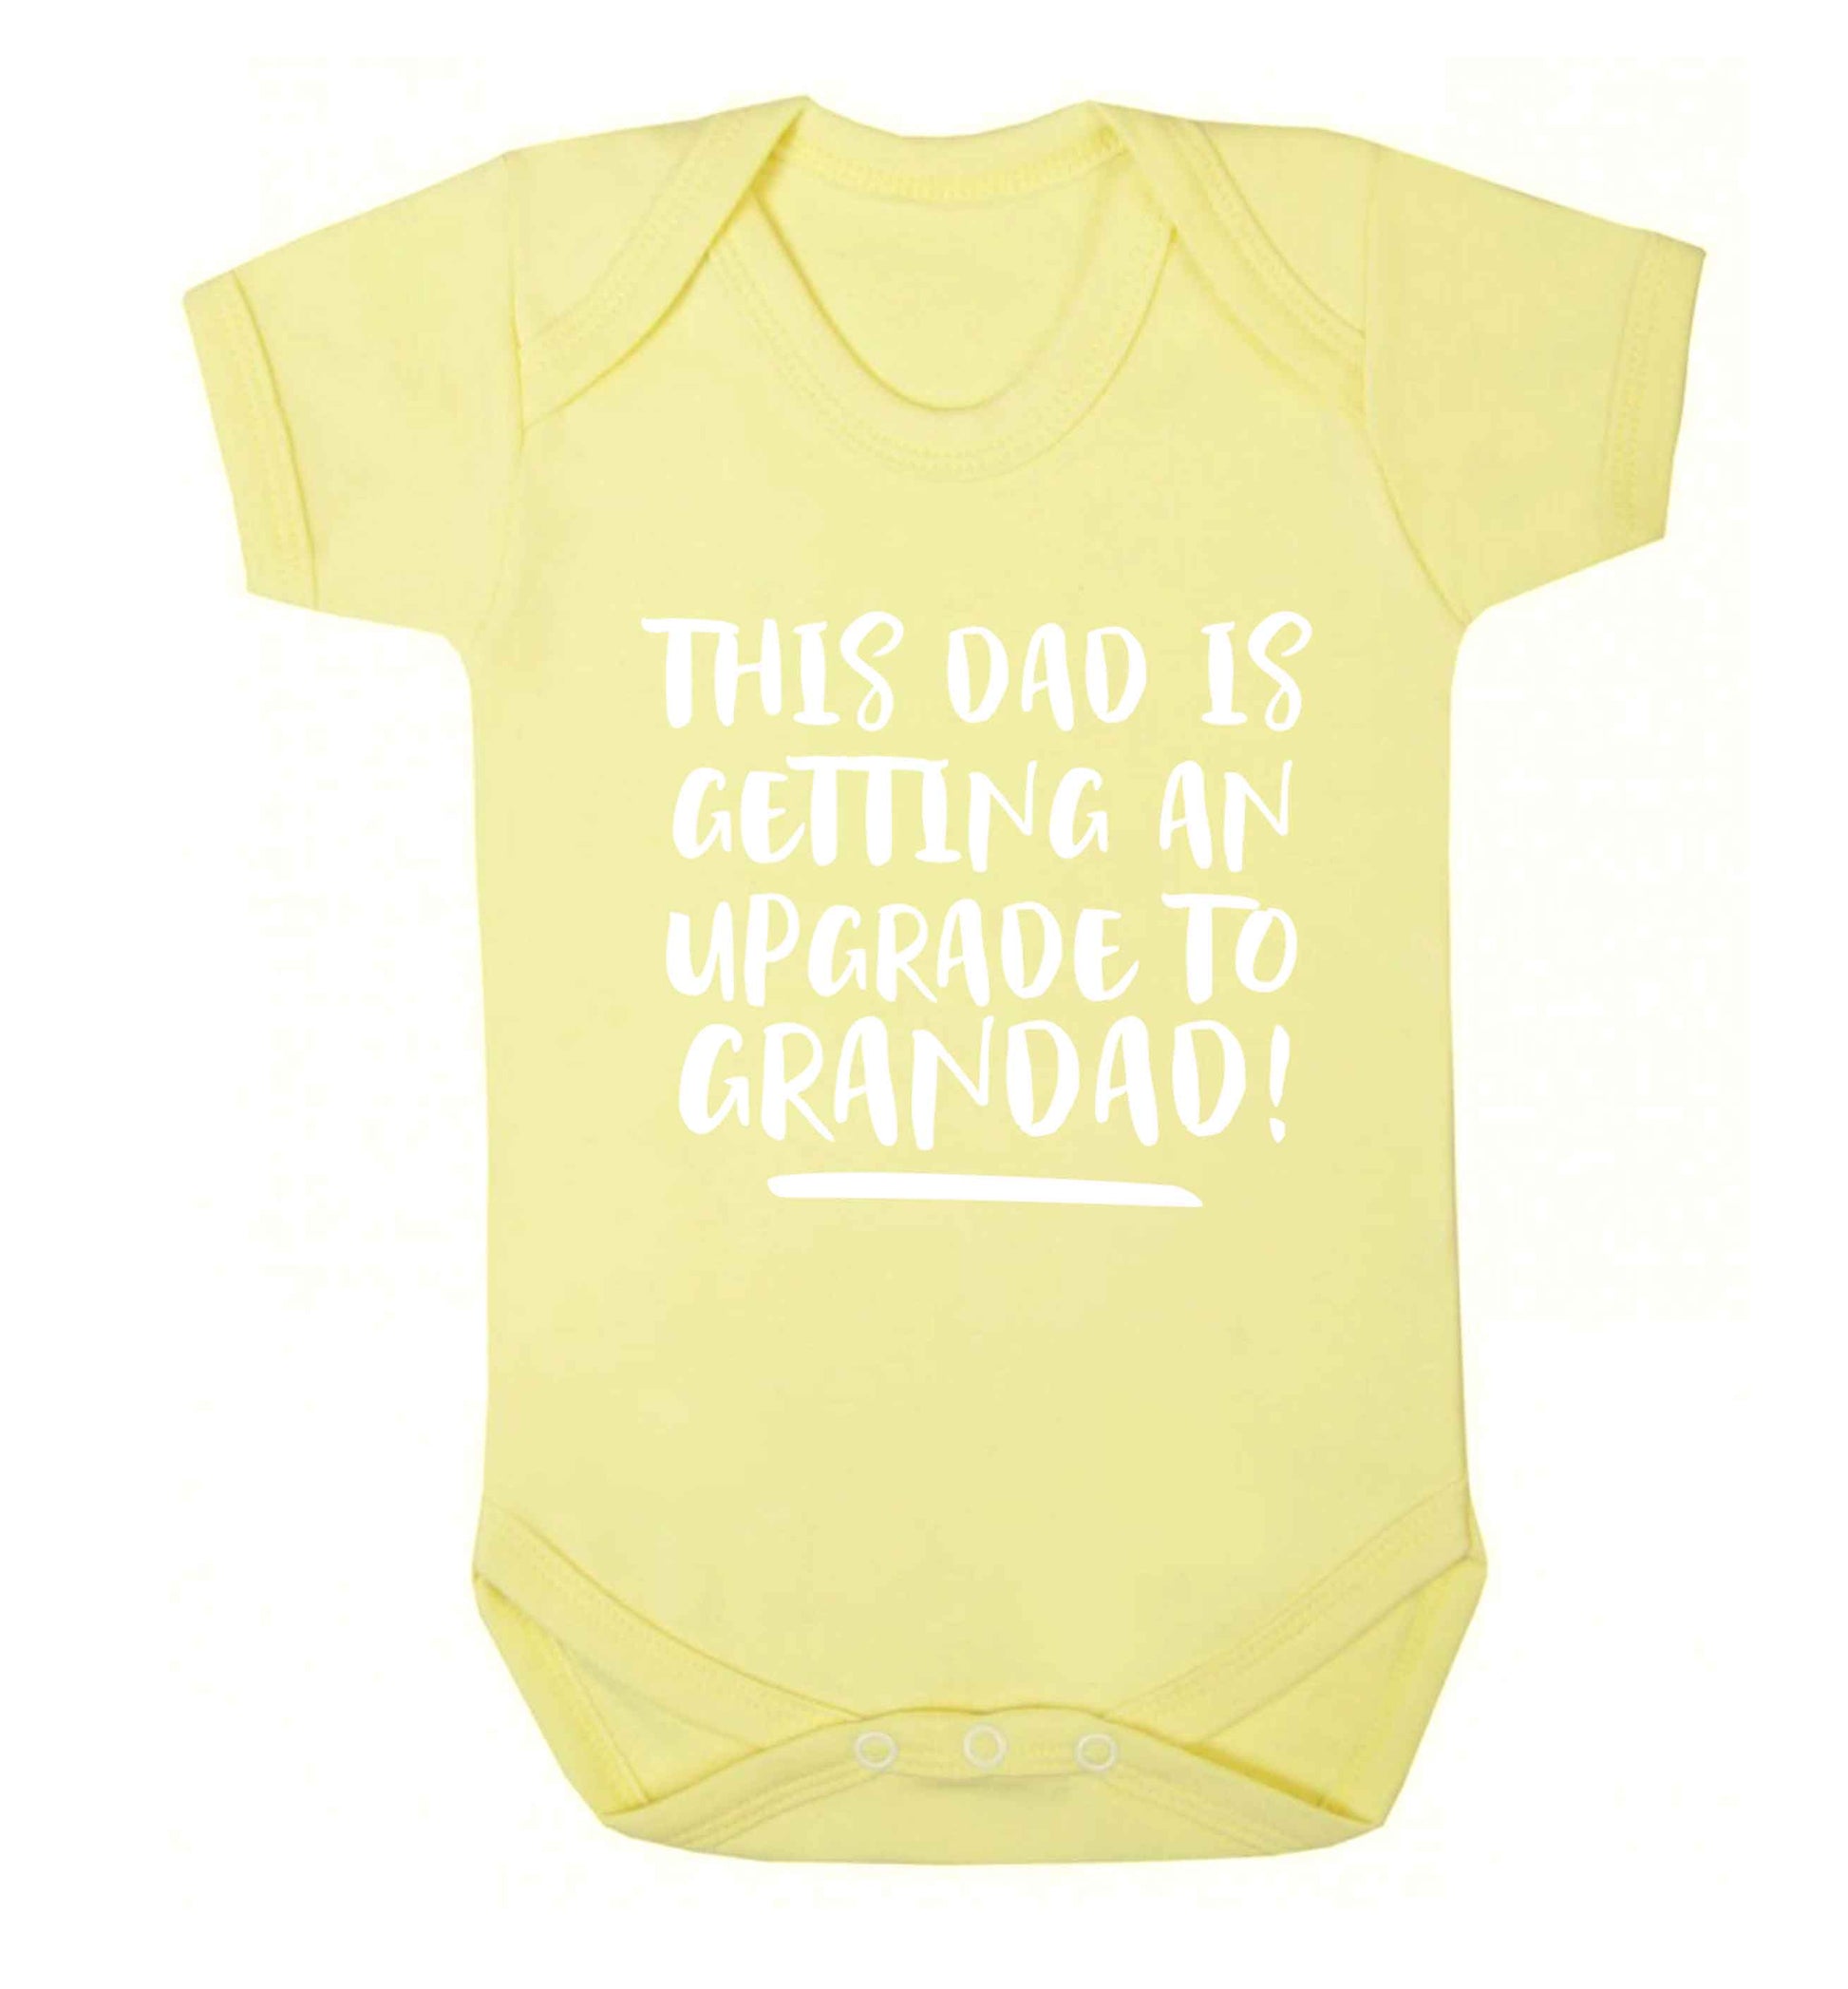 This dad is getting an upgrade to grandad! Baby Vest pale yellow 18-24 months